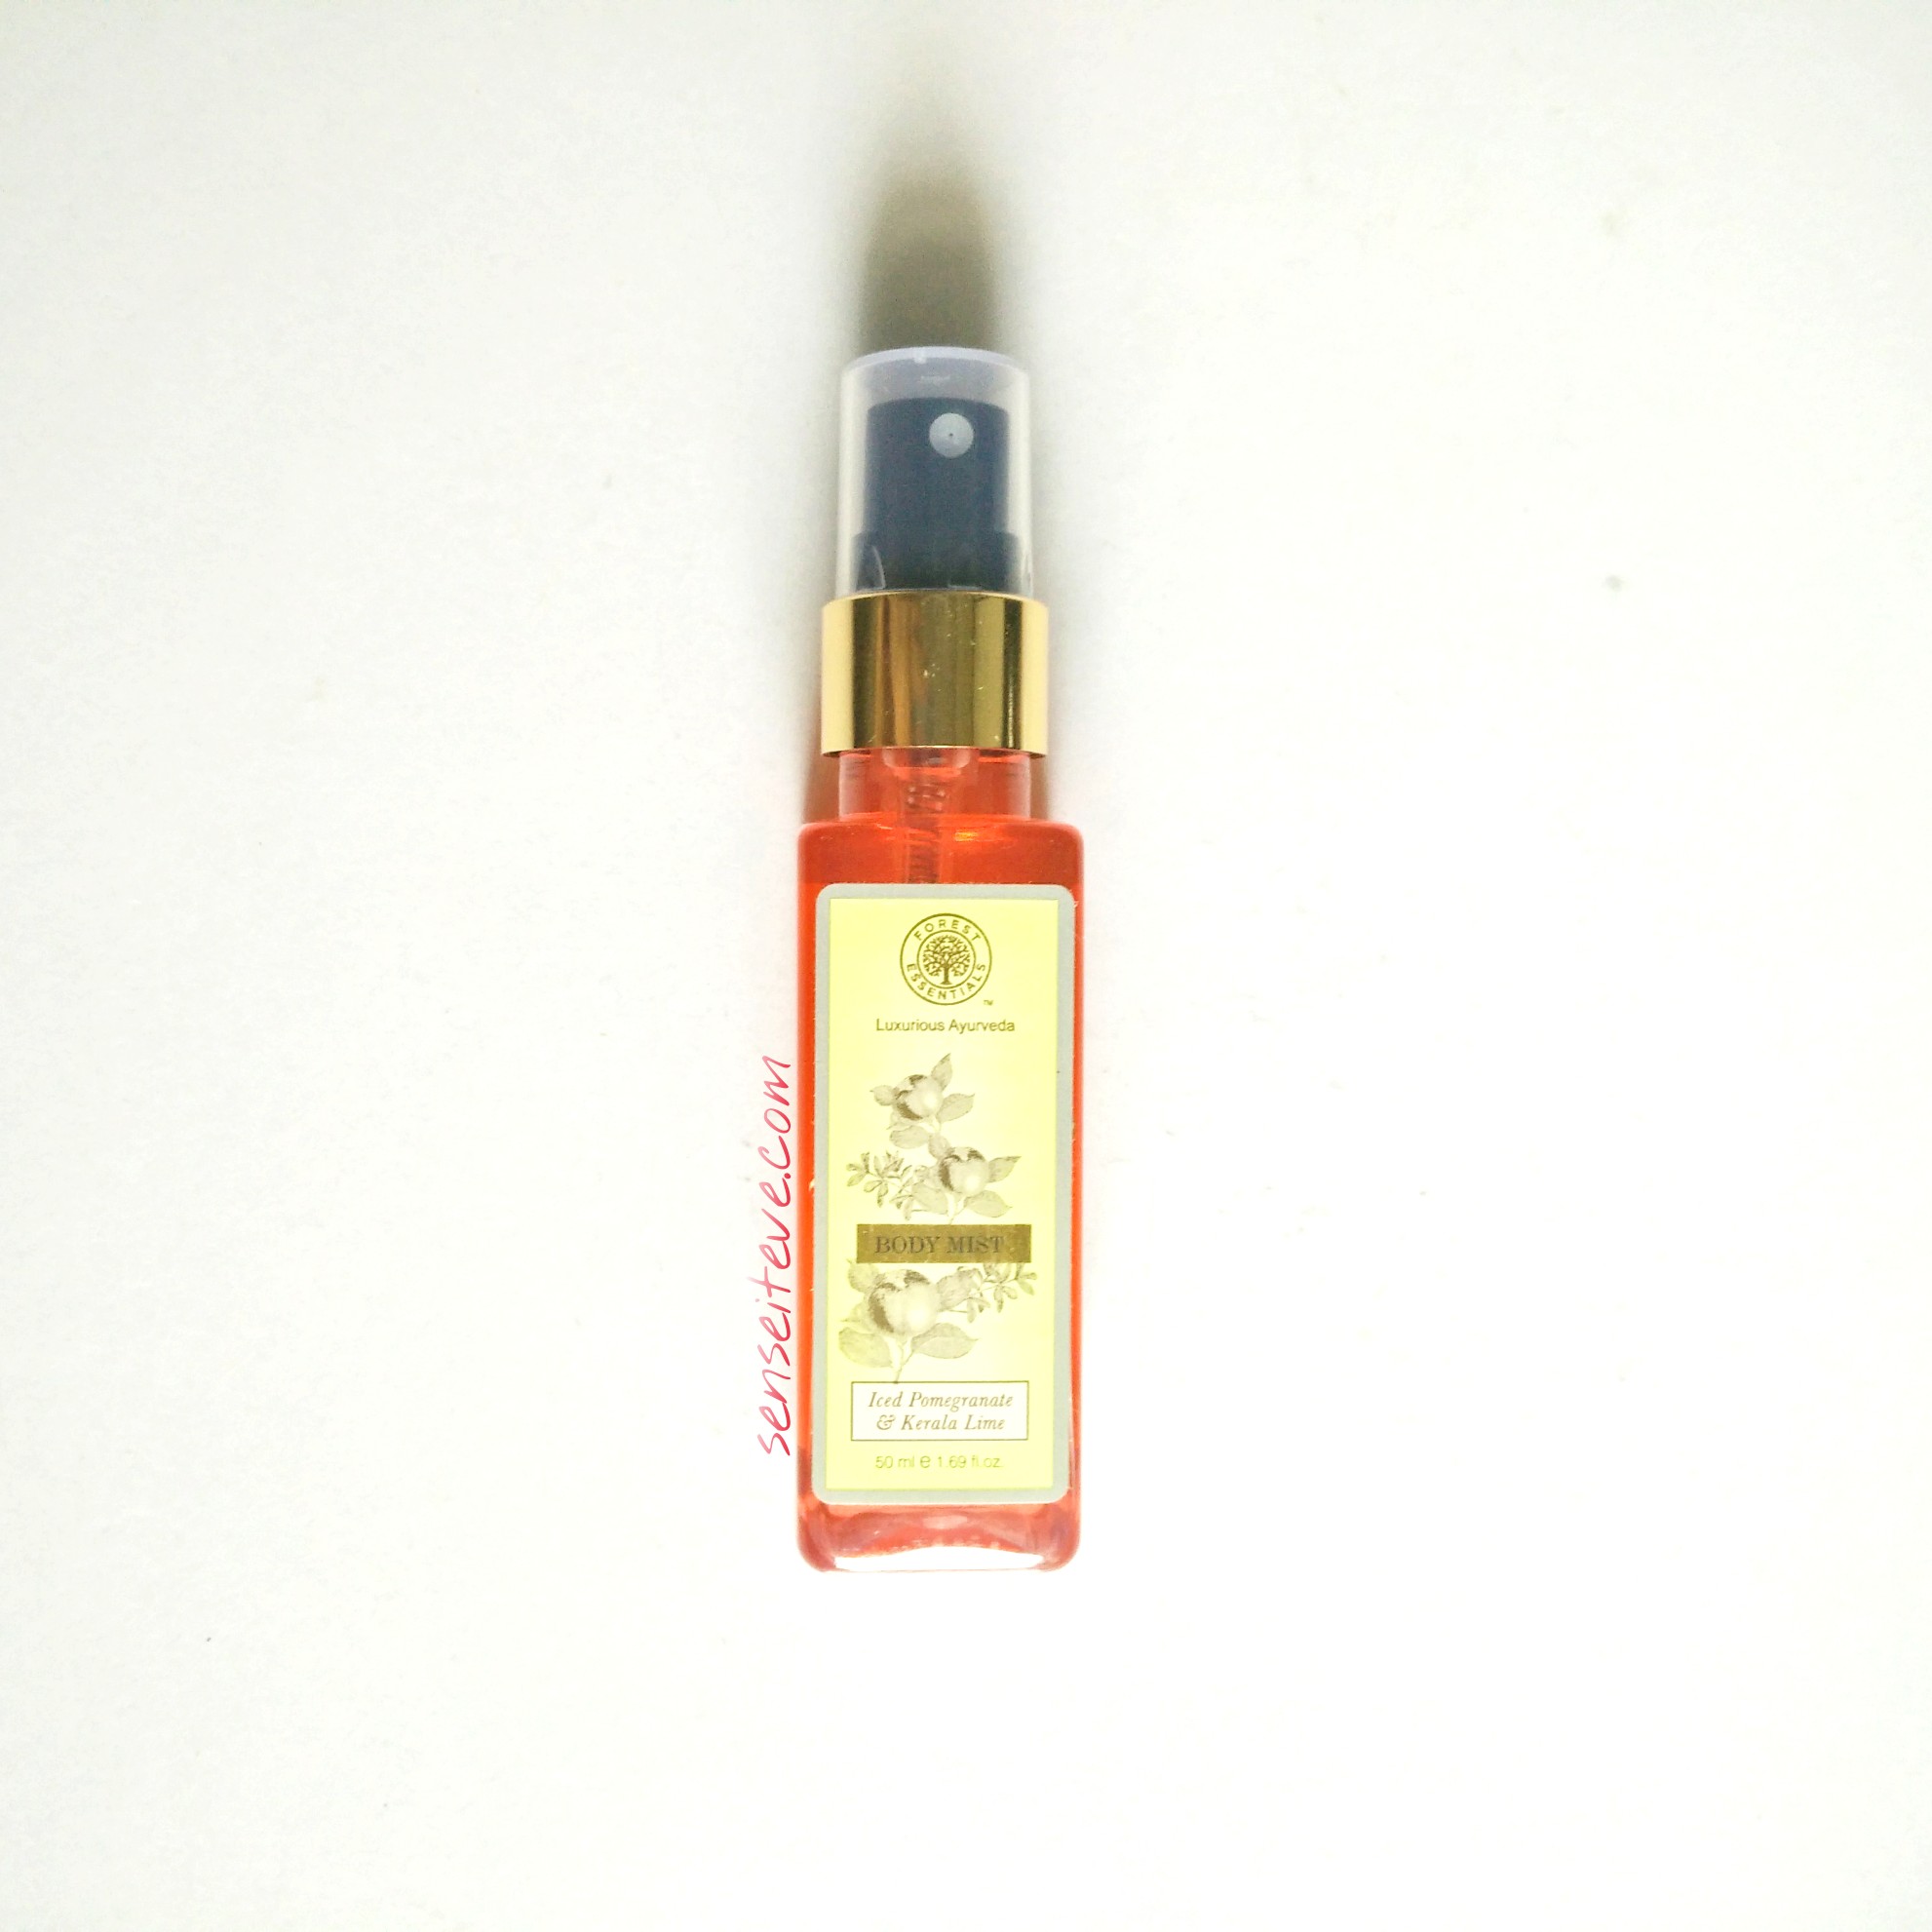 Forrest-Essentials-Body-Mist-Iced-Pomegranate-Kerala-Lime-Review